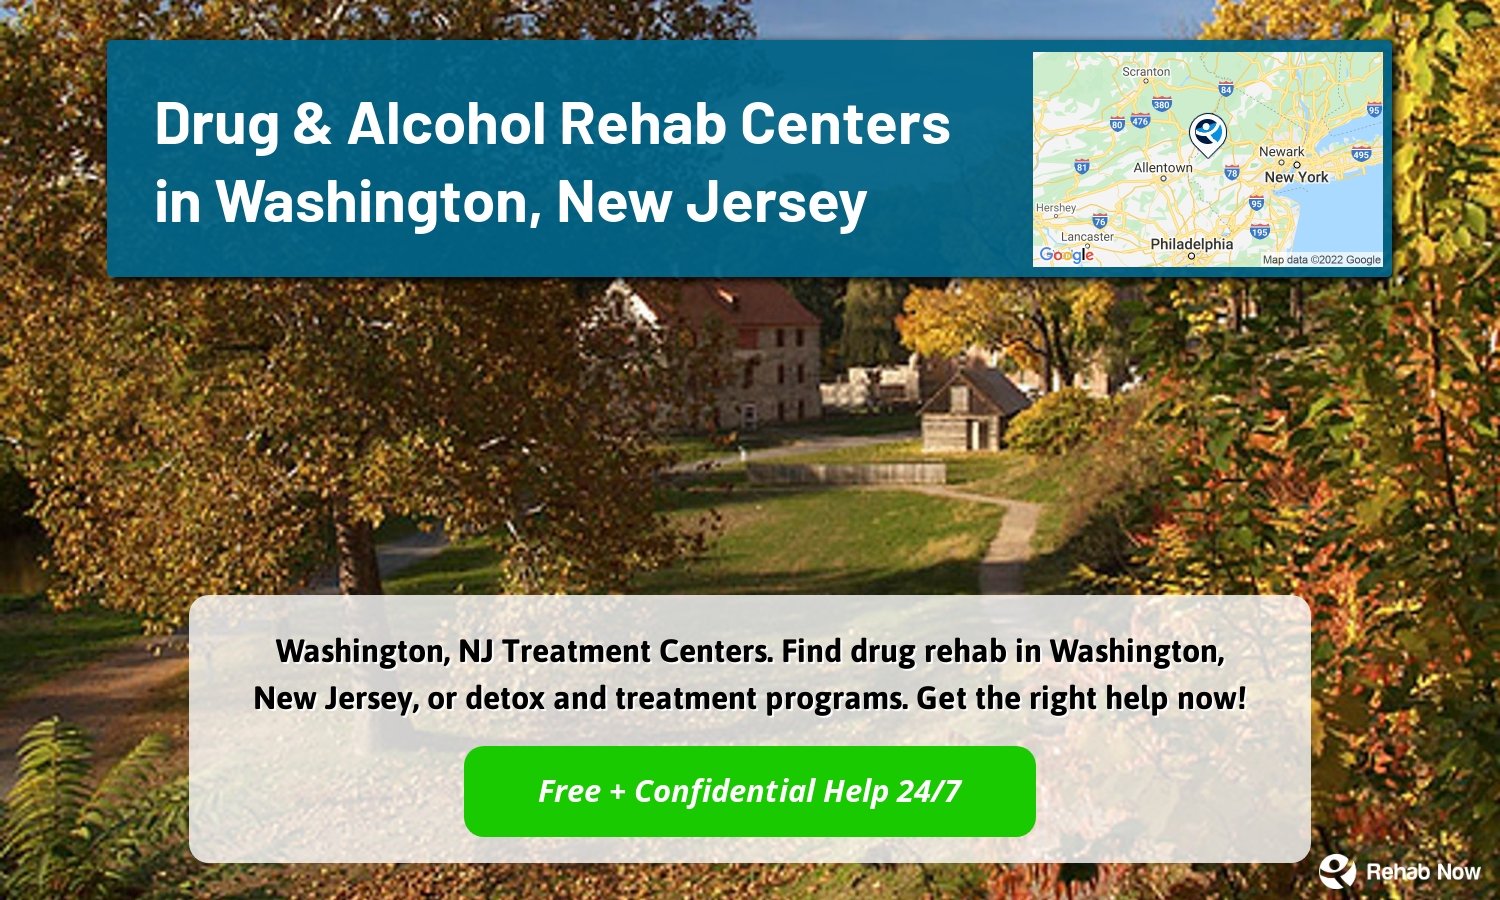 Washington, NJ Treatment Centers. Find drug rehab in Washington, New Jersey, or detox and treatment programs. Get the right help now!